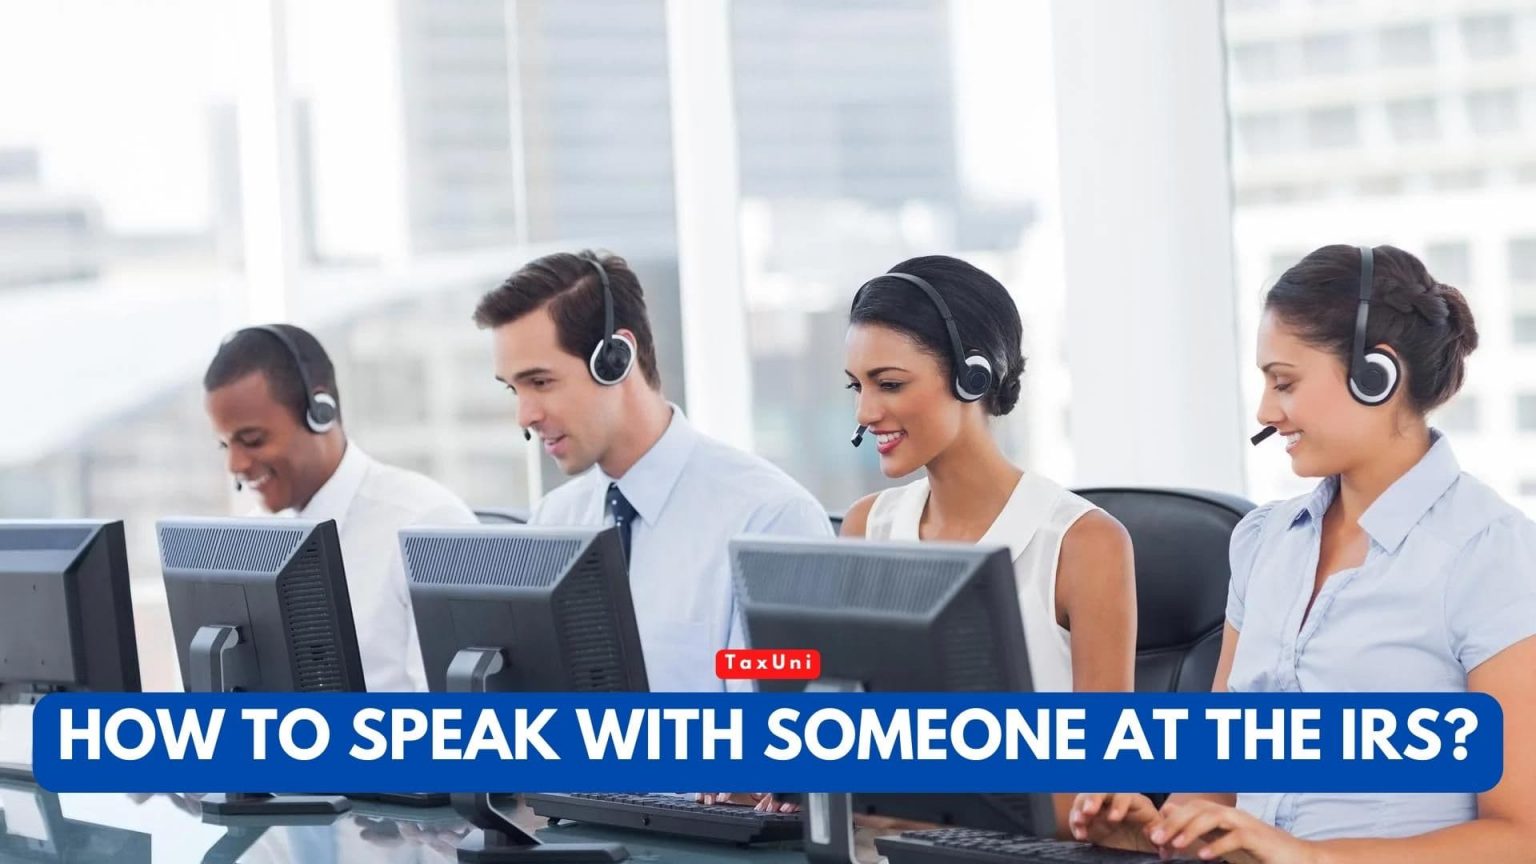 How to Speak with Someone at the IRS? Methods For Speaking with IRS Agent